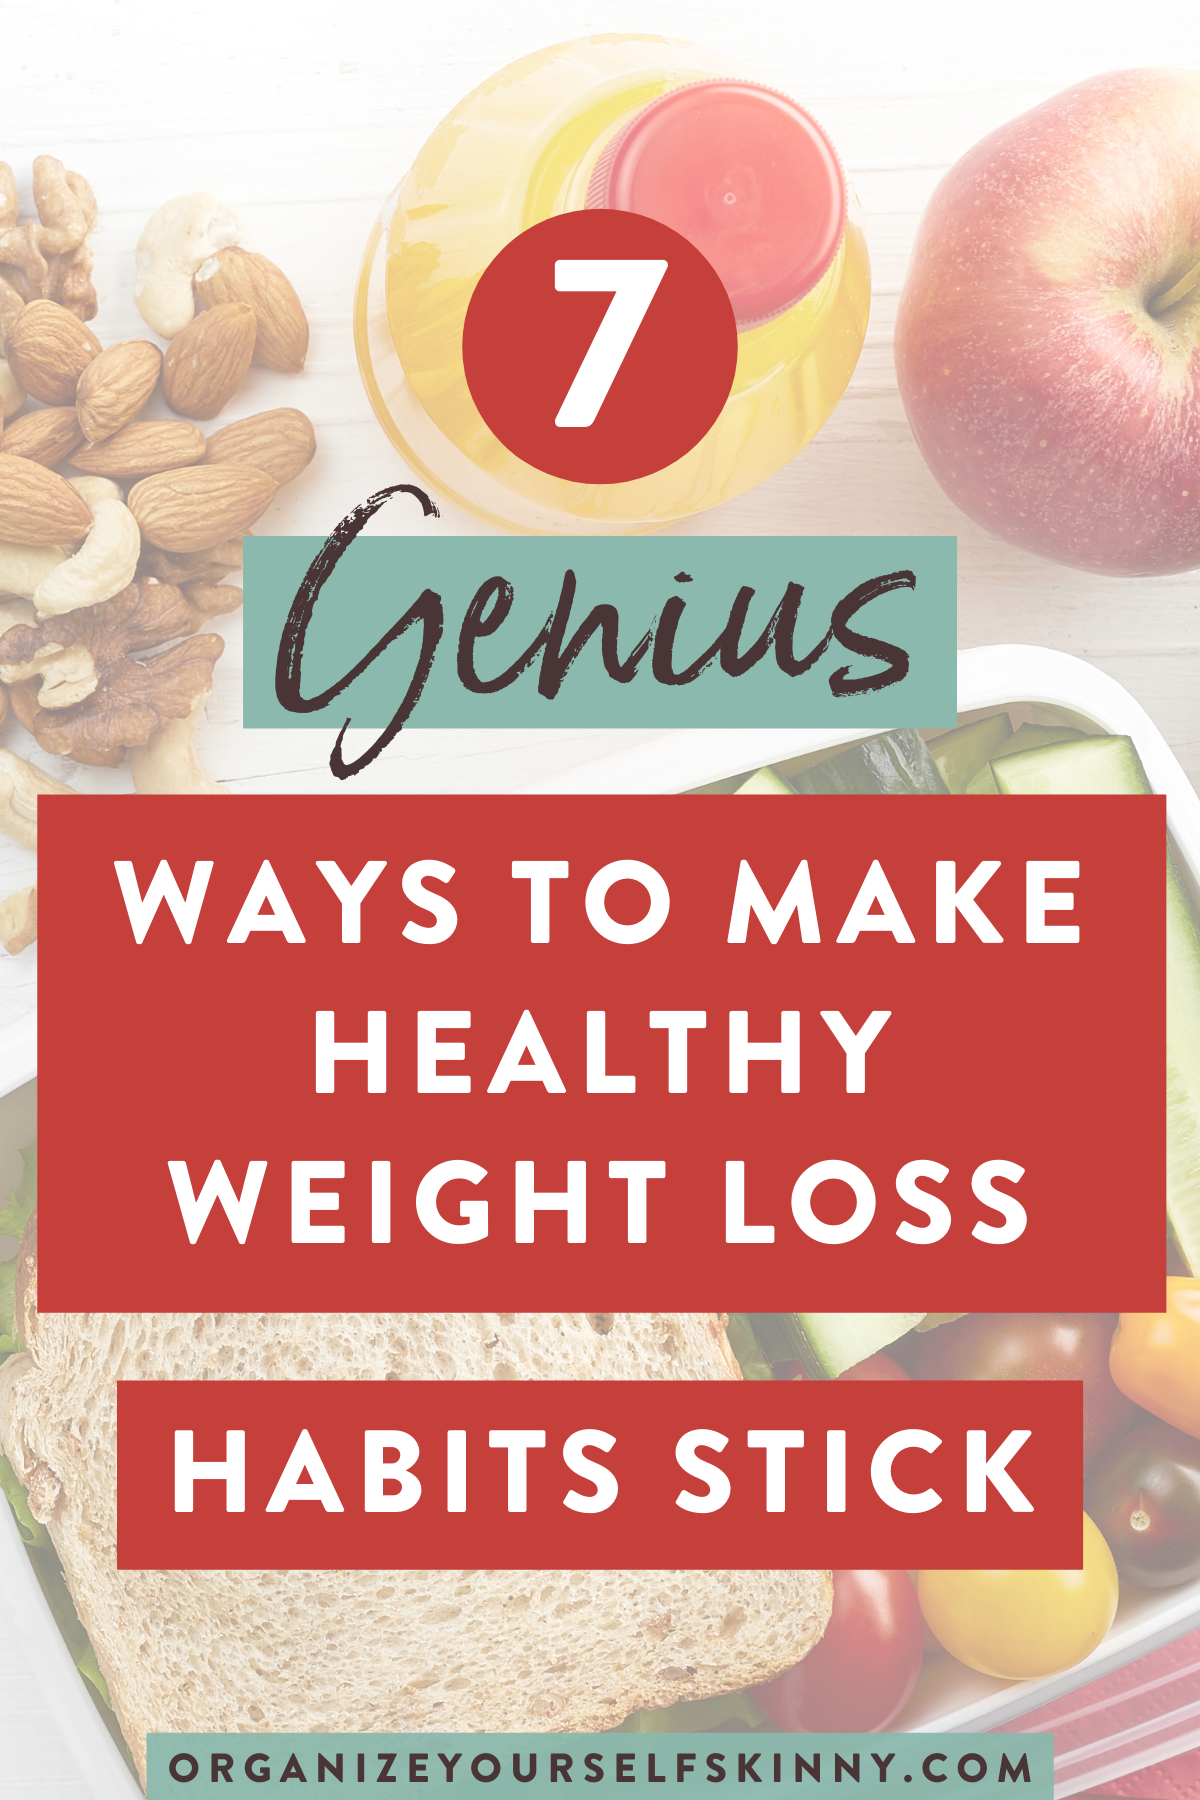 Healthy Habits: 7 ways to make weight loss habits stick | Lifestyle Changes Losing Weight -   18 fitness Lifestyle change ideas